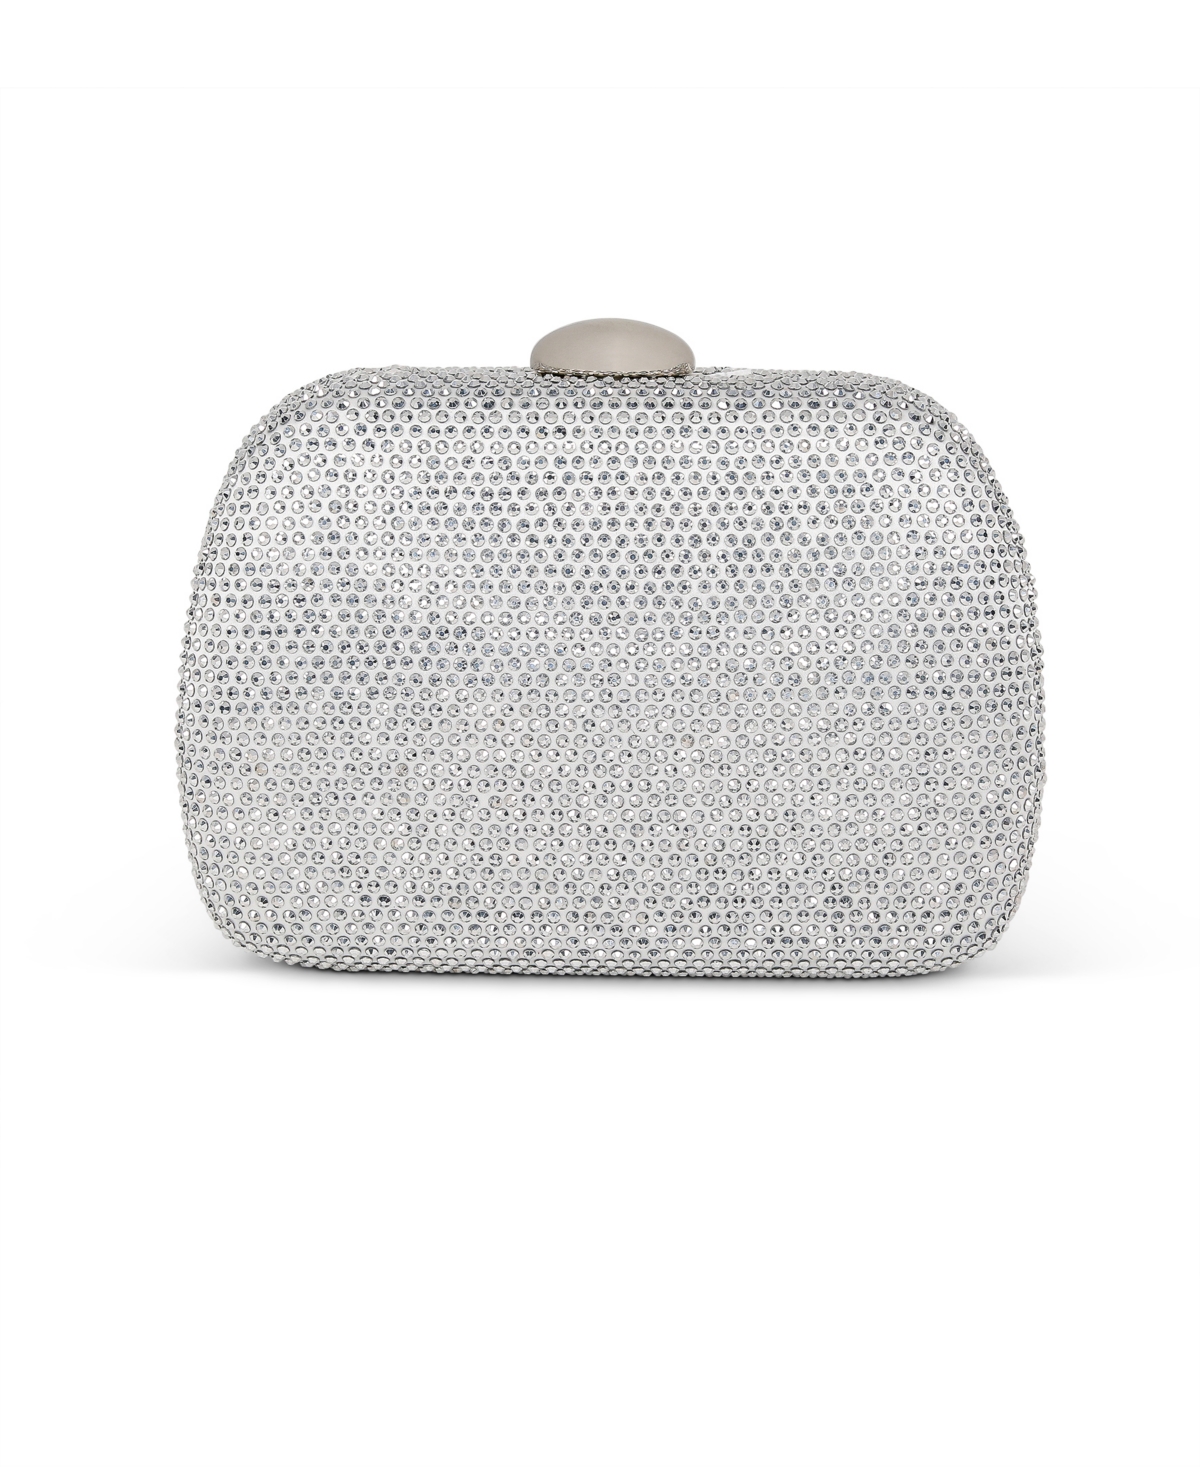 Woman's Blossom Crystal Minaudiere - White